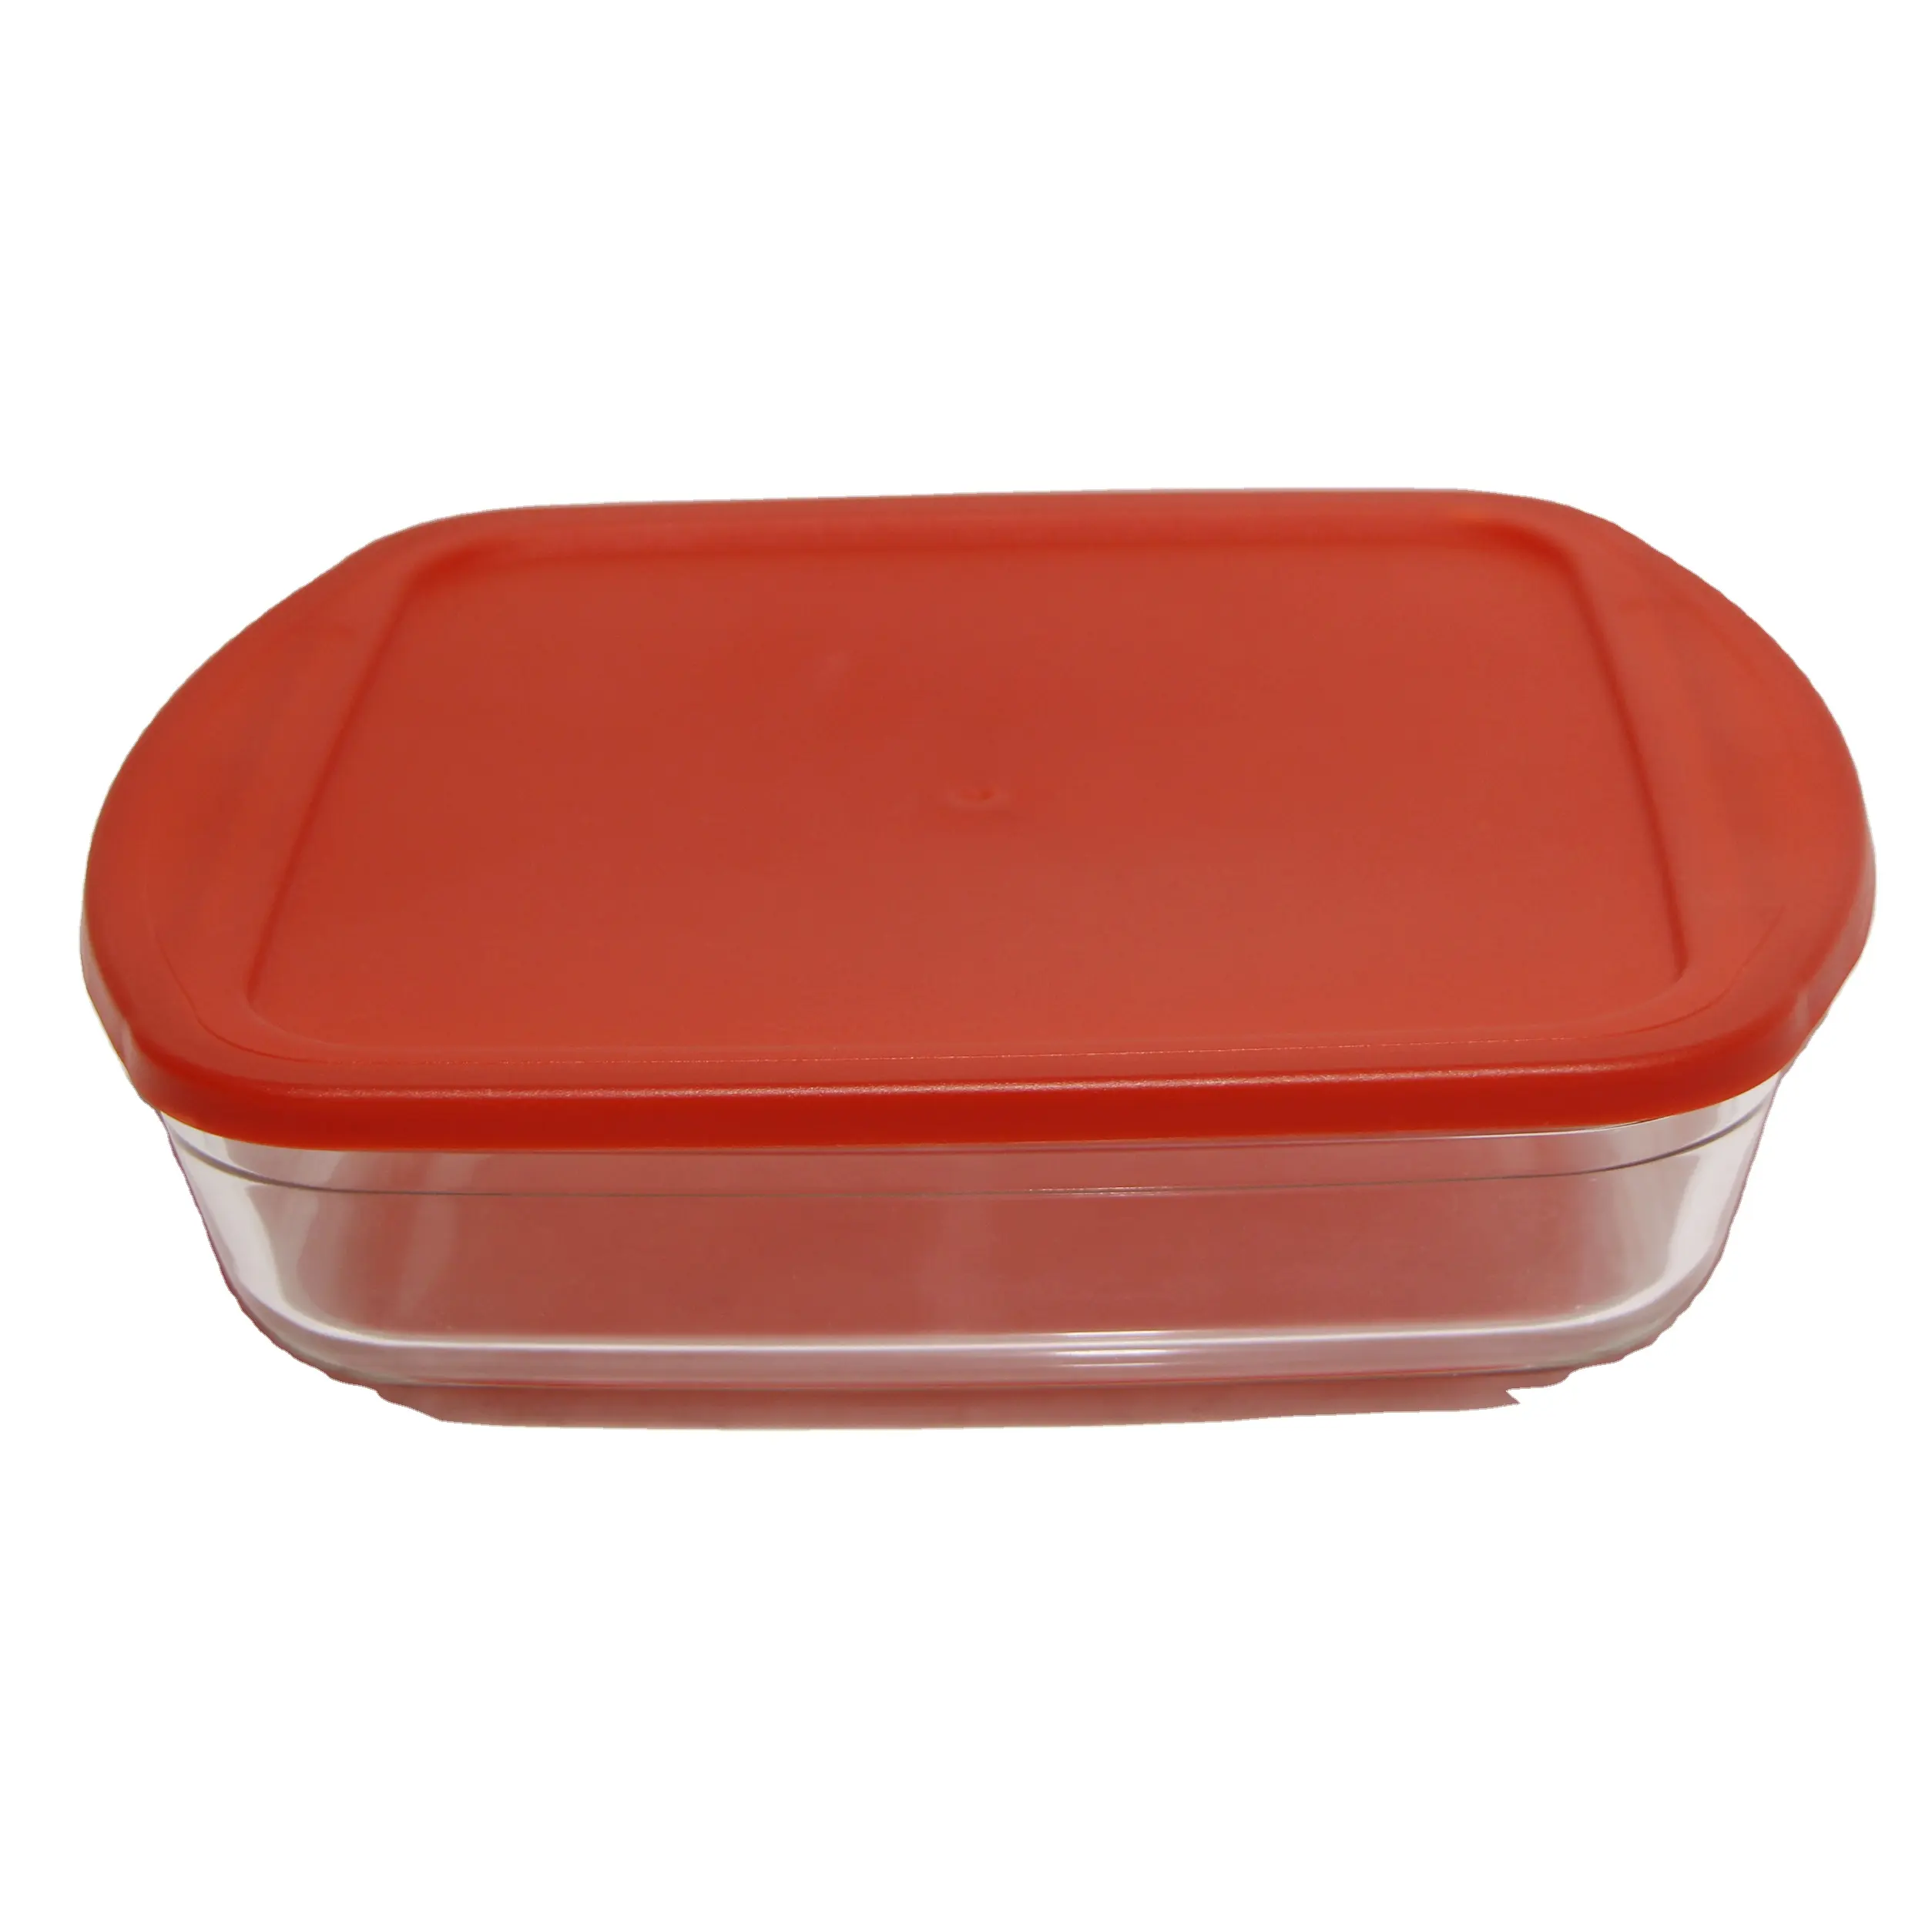 Square Oval Rectangular High Borosilicate Glass Baking Dish Glass Pan With Lid